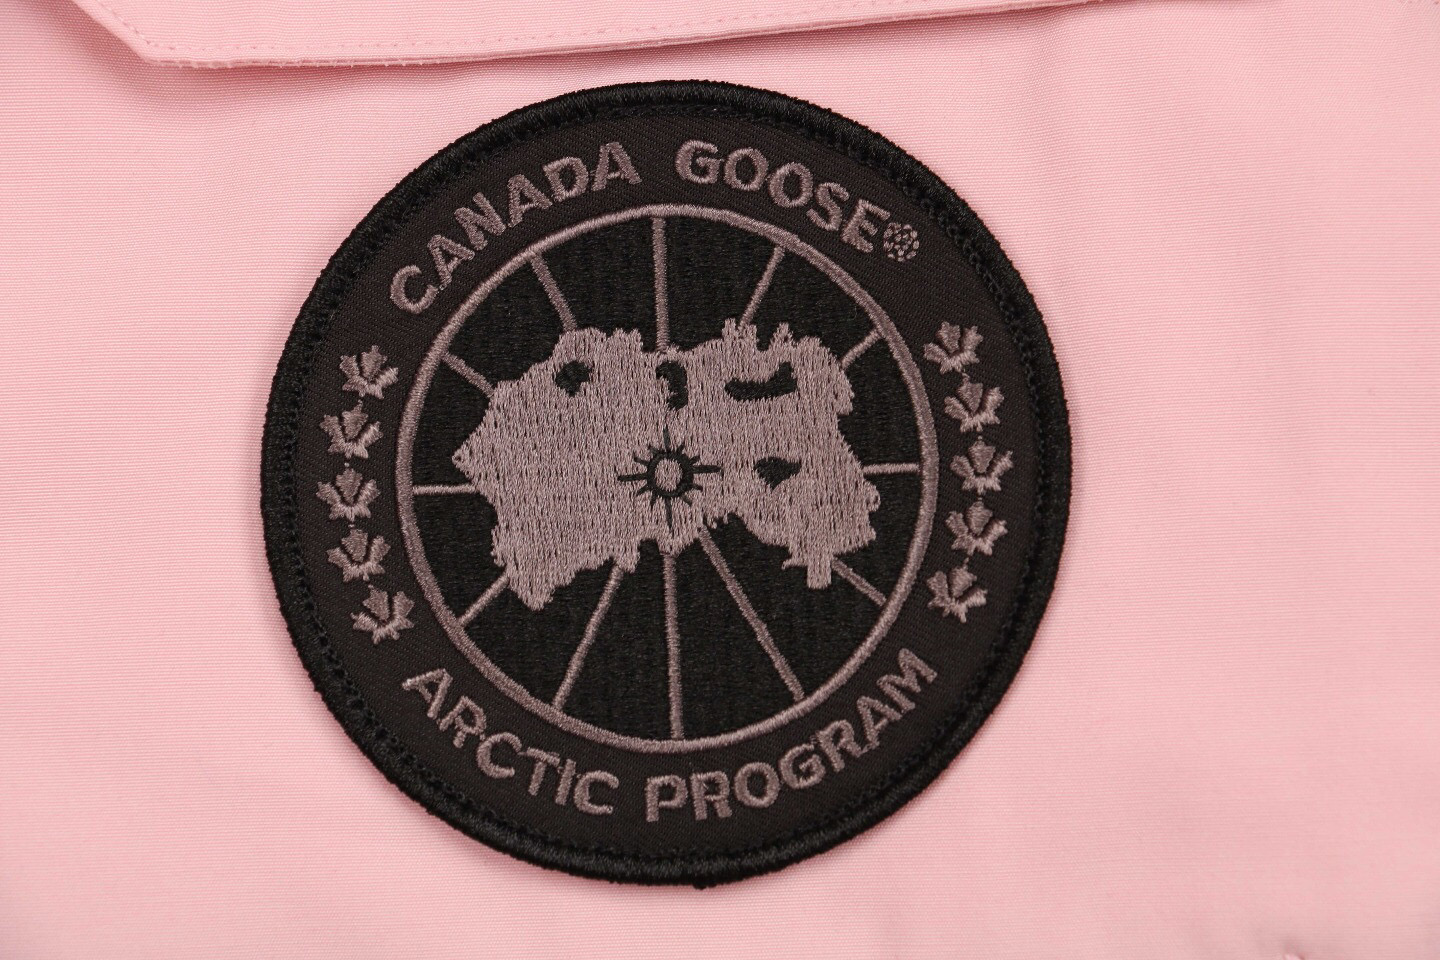 08 Canada Goose 19fw Expedition 4660ma Down Jacket Coat Pink (6) - newkick.org